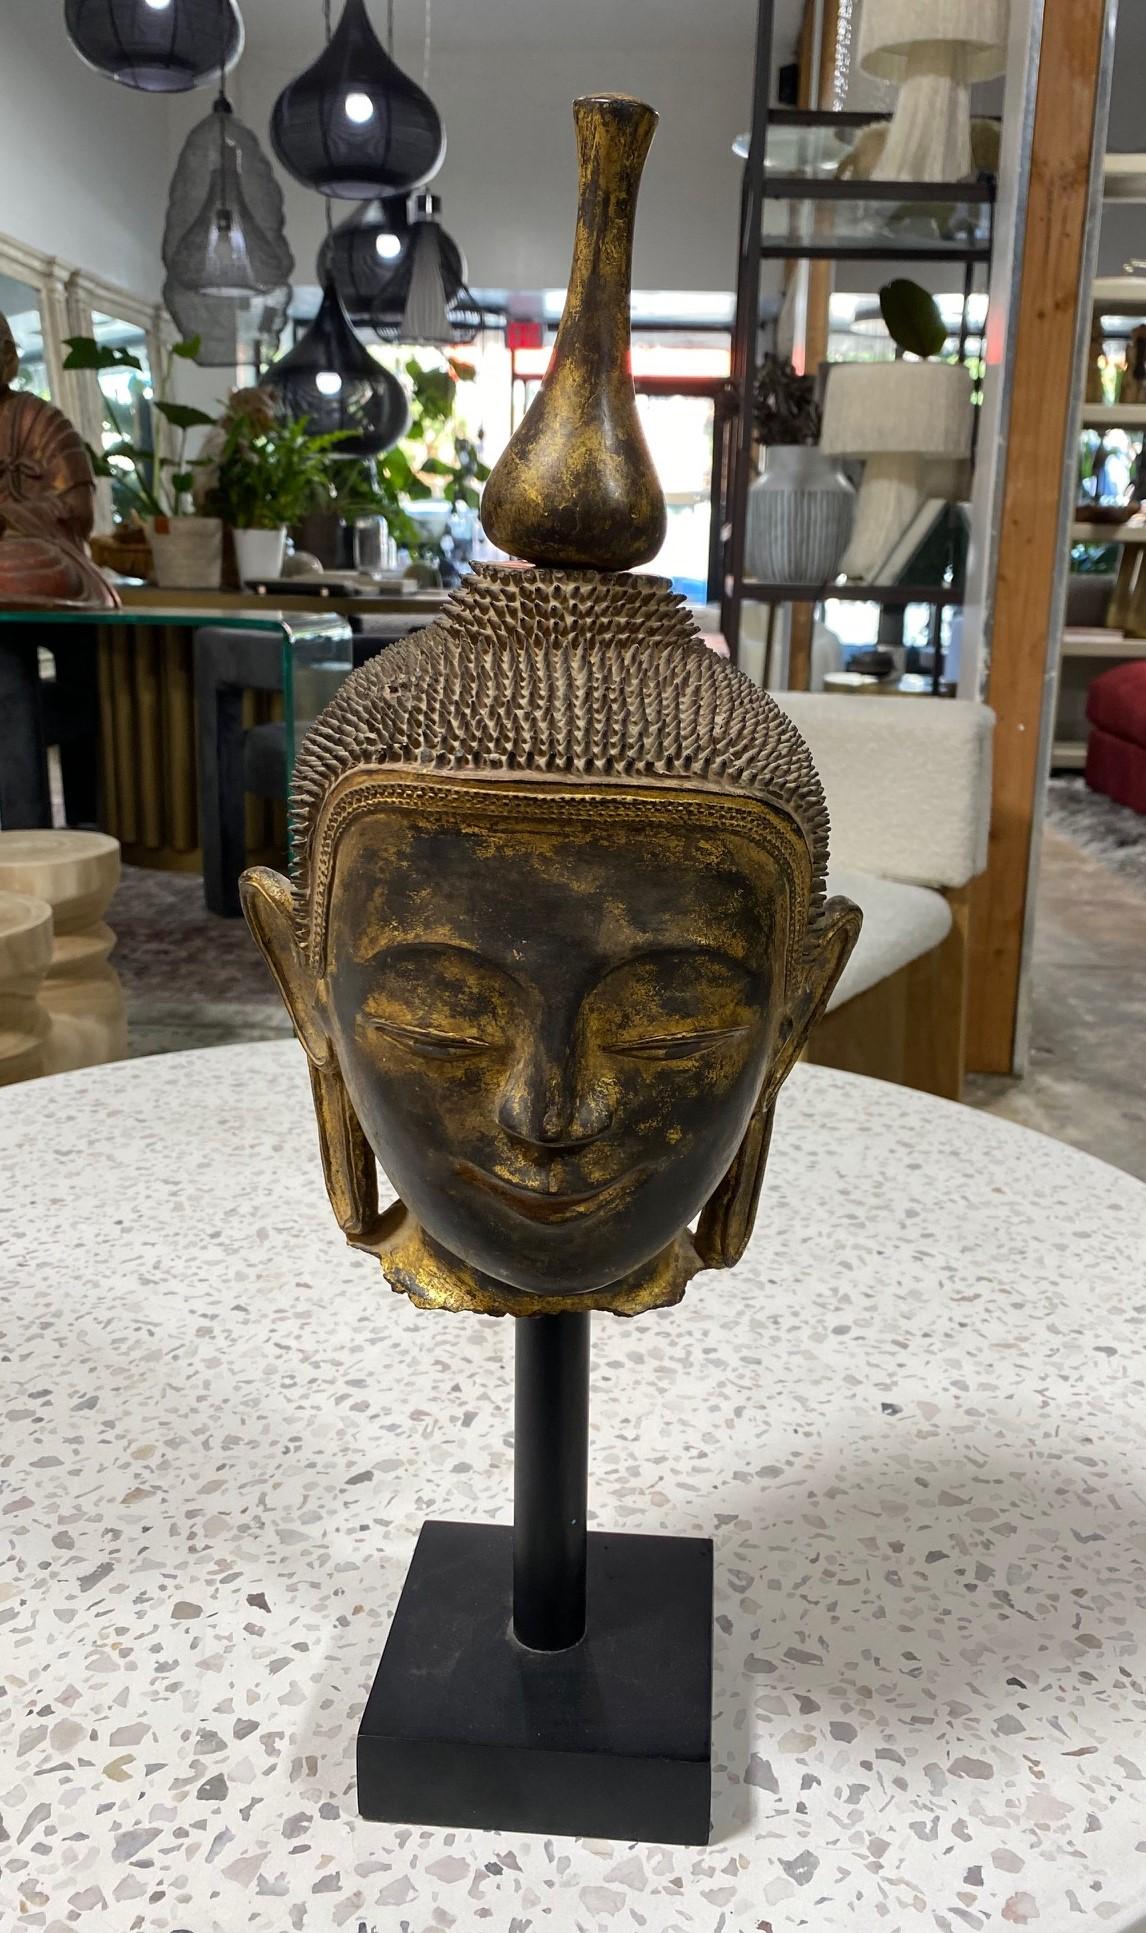 An exceptionally beautiful, serene, delicately crafted Buddha head/bust - hand-made using the ancient Thayo technique which entails using a lacquer paste made by mixing lacquer with wood ash, rice husk, bone powder, and sawdust and applying layers